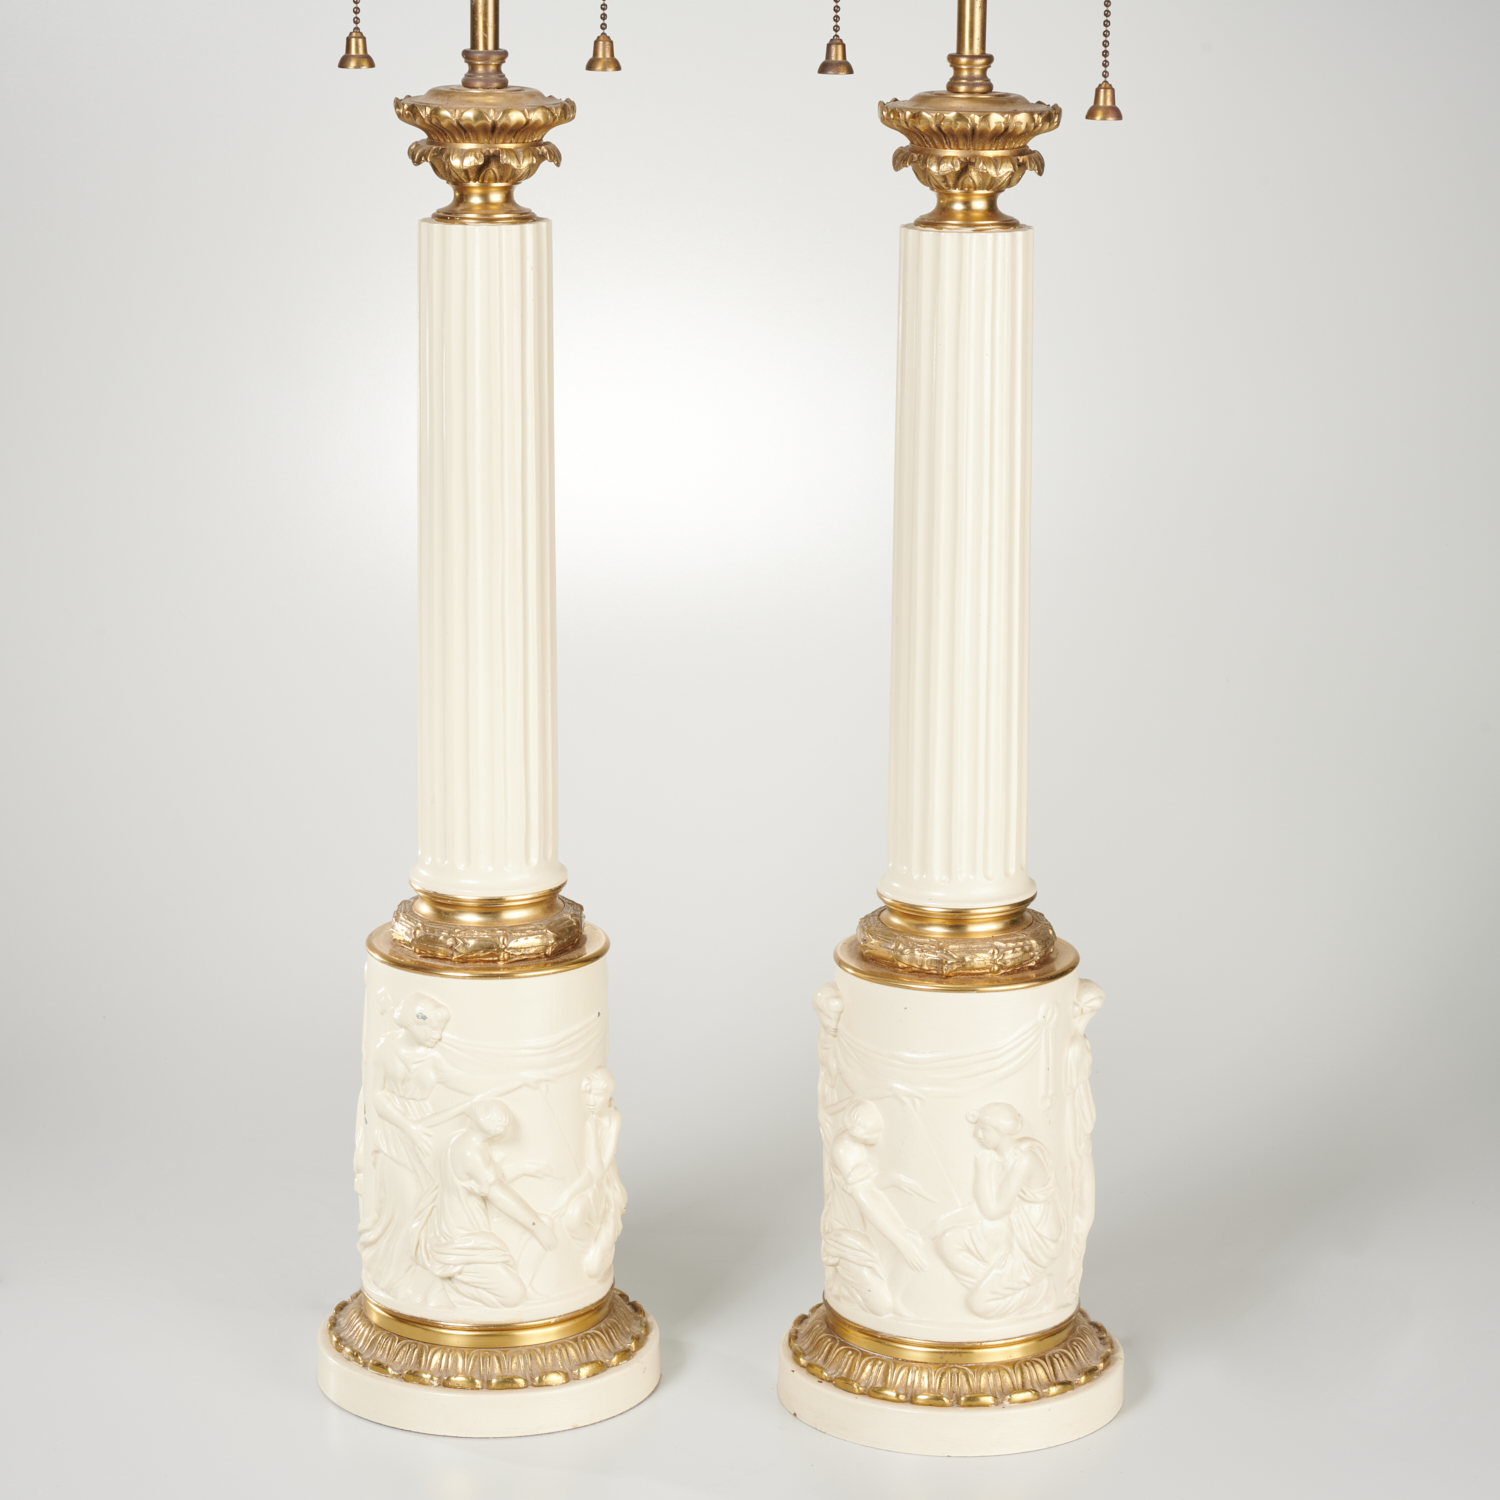 PAIR GRECO ROMAN STYLE TABLE LAMPS 2ce222